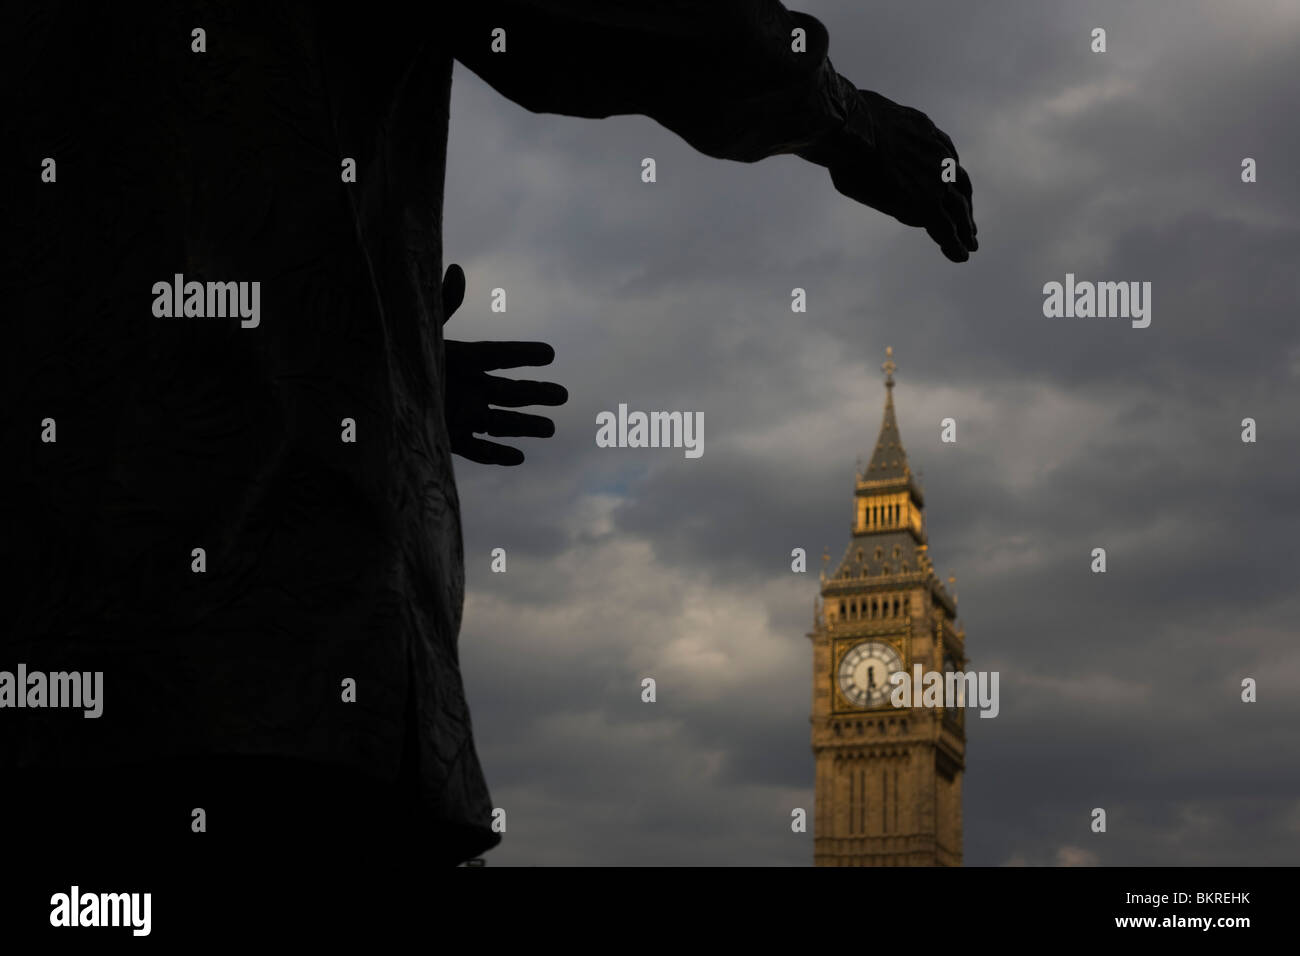 Hands of Nelson Mandela's statue appears to reach for Elizabeth Tower, a symbolic grasp for British political power. Stock Photo